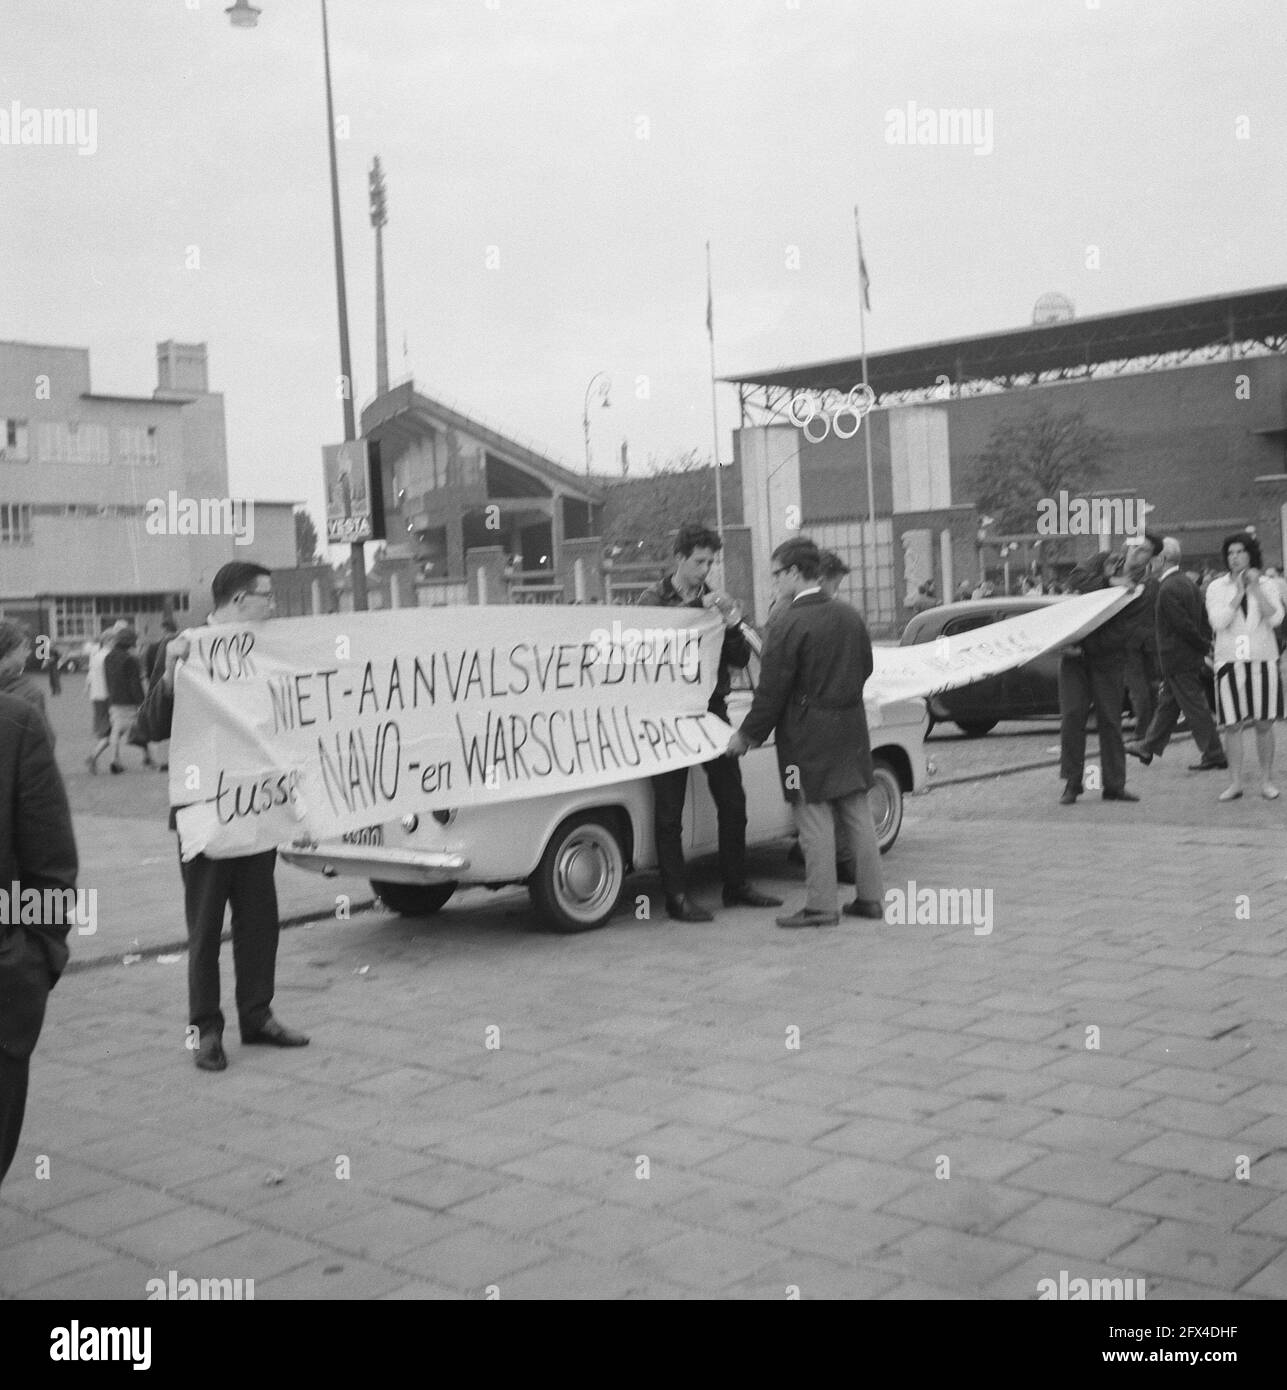 Demonstrators in Amsterdam for a non-aggression treaty between NATO and Warsaw Pact, July 5, 1963, demonstrators, The Netherlands, 20th century press agency photo, news to remember, documentary, historic photography 1945-1990, visual stories, human history of the Twentieth Century, capturing moments in time Stock Photo